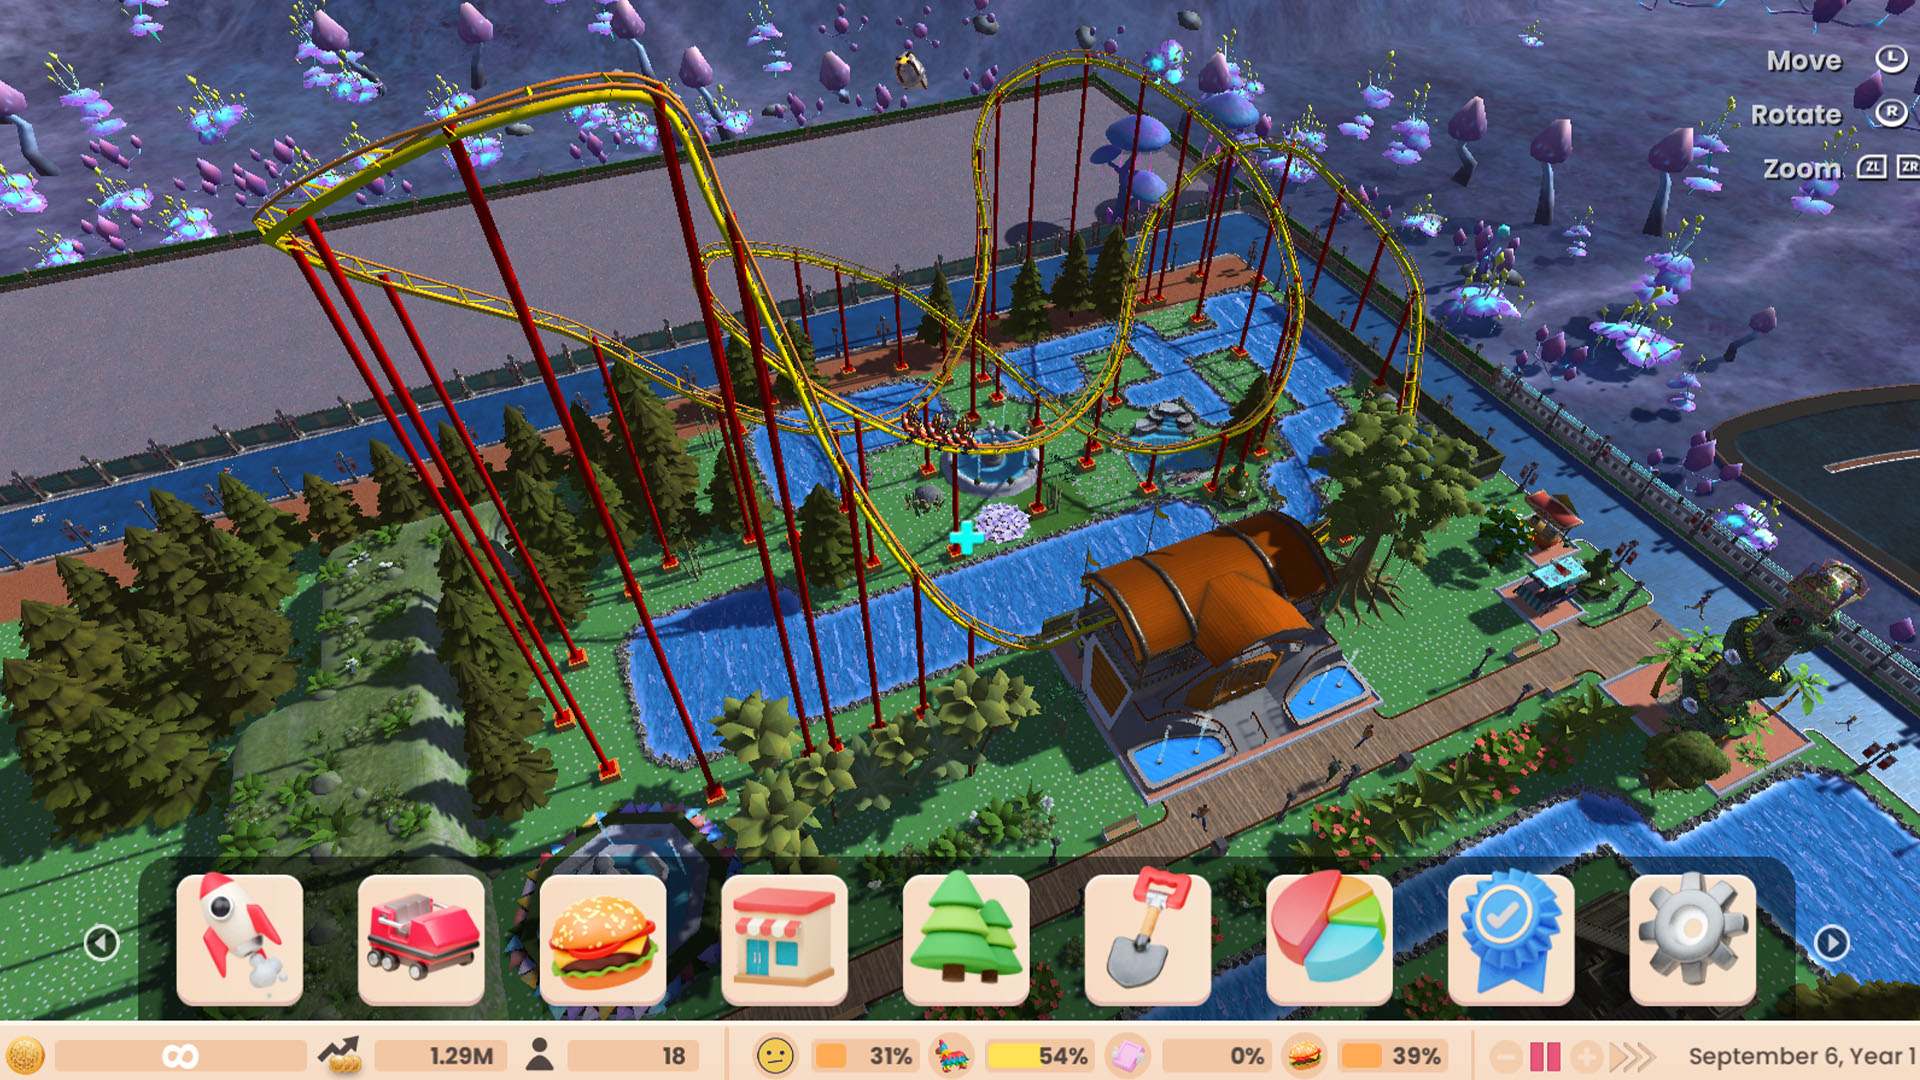 RollerCoaster Tycoon: Deluxe - RollerCoaster Tycoon - The Ultimate